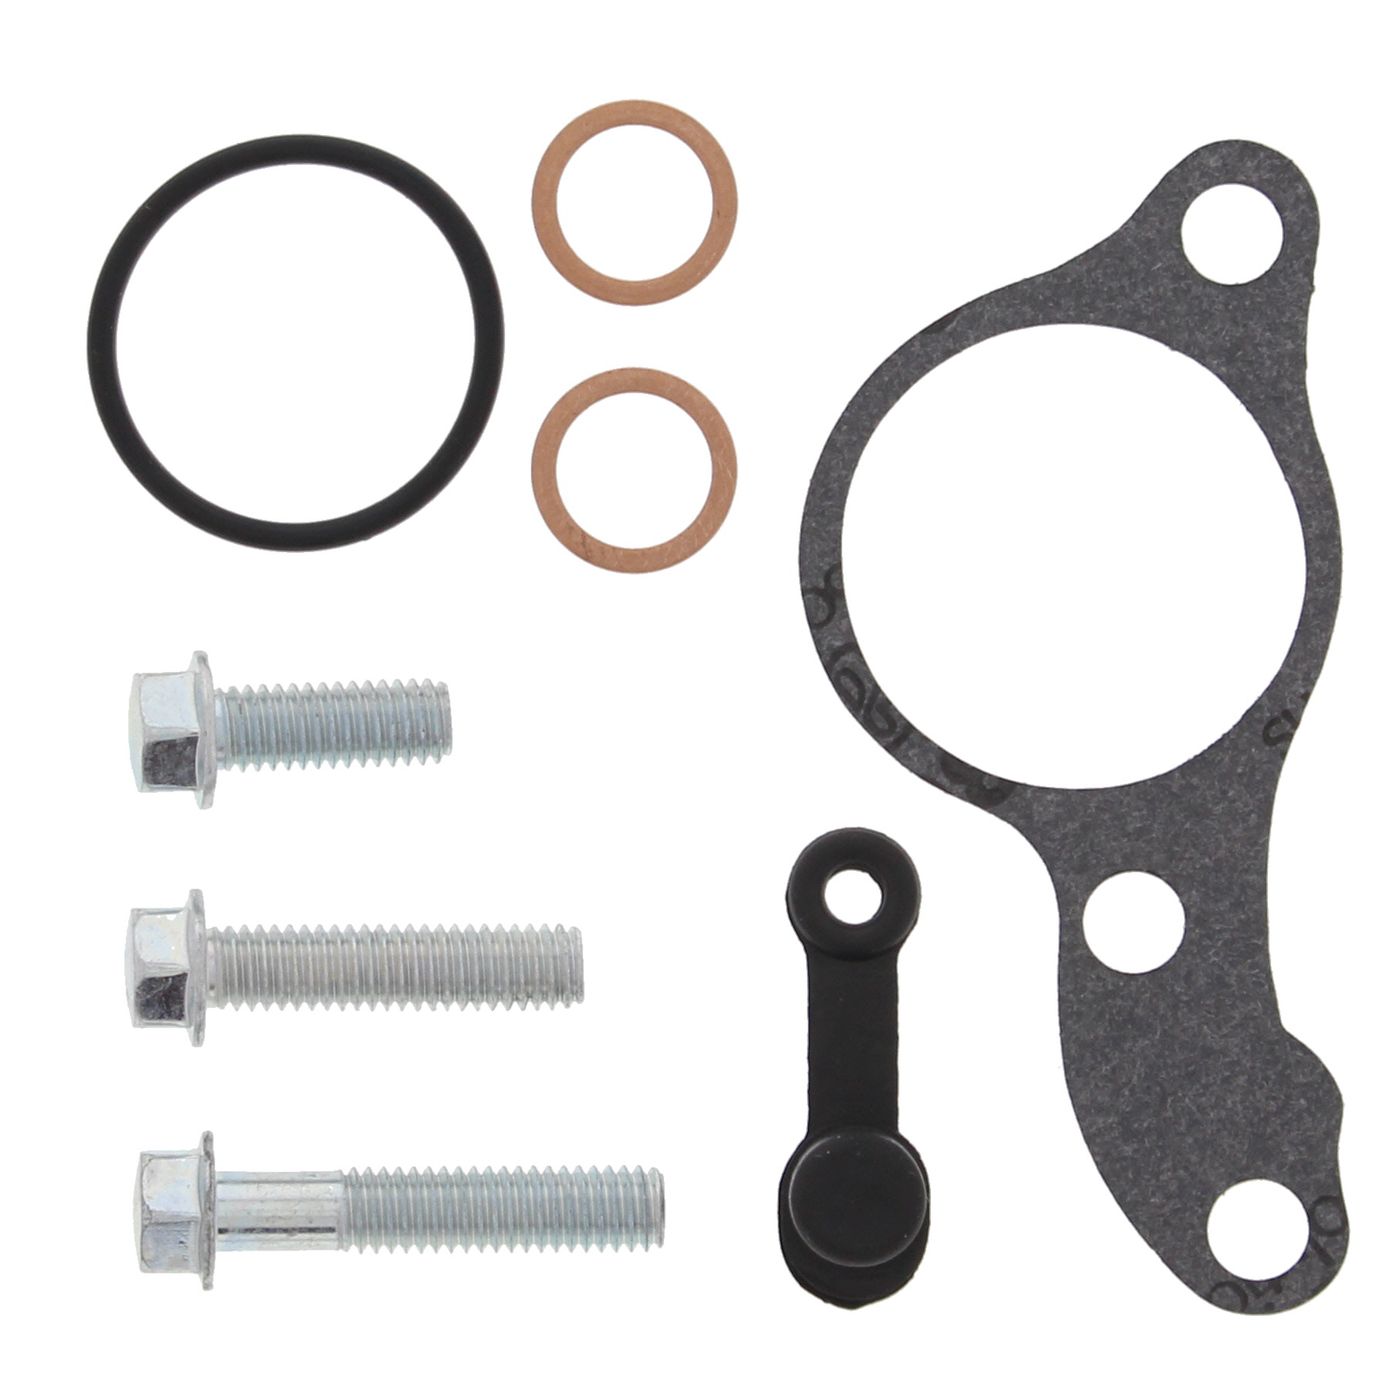 Wrp Clutch Slave Cylinder Kits - WRP186011 image